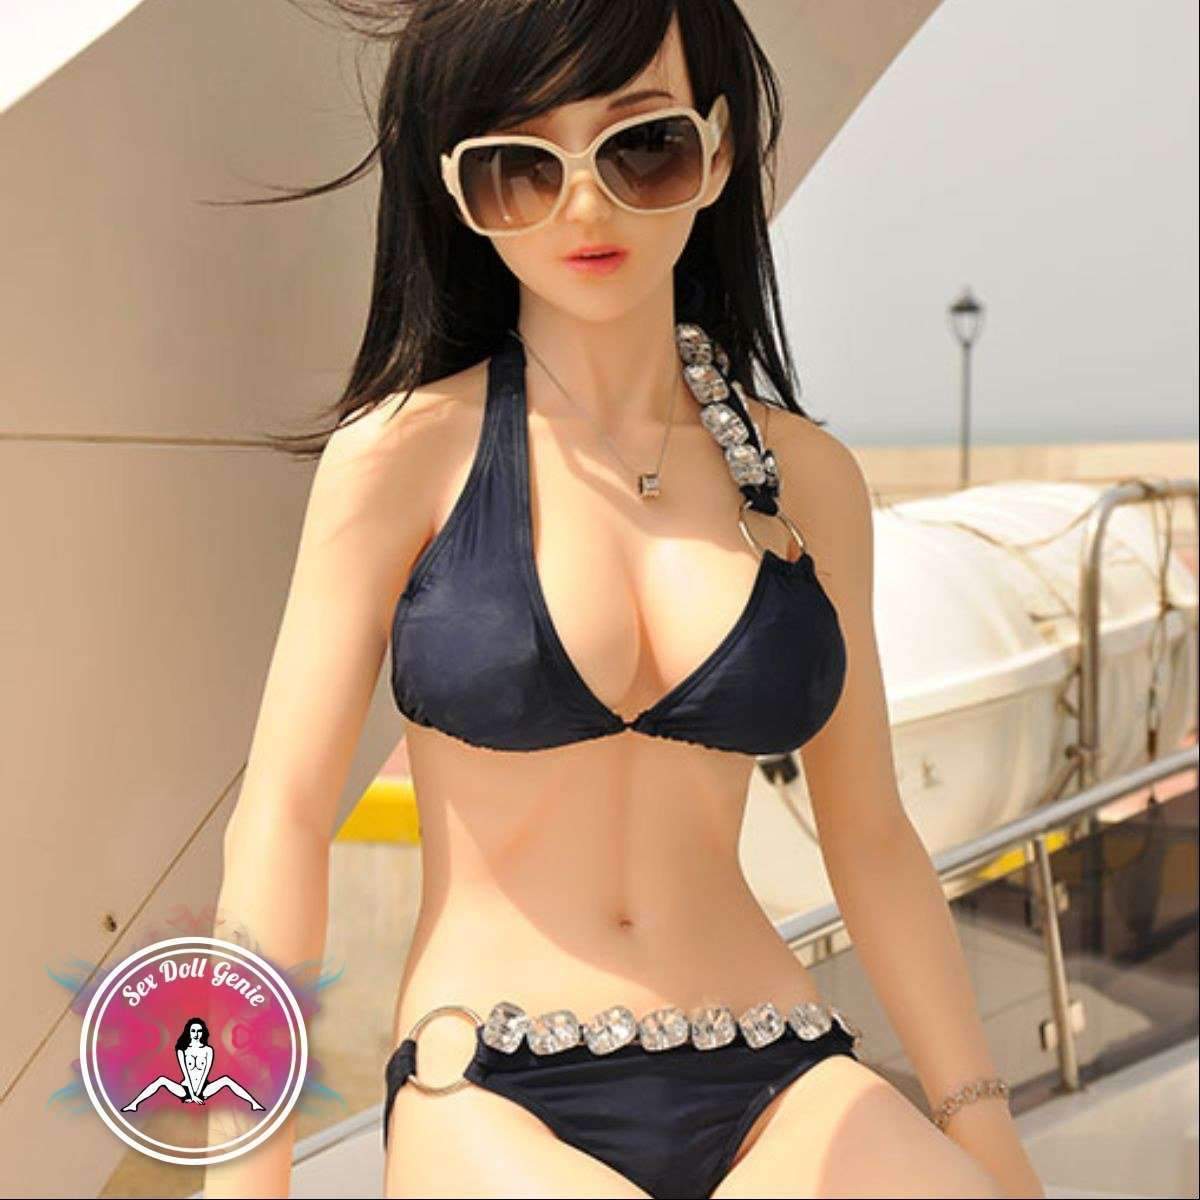 DS Doll - 163Plus - Jiaxin Head - Type 4 D Cup Silicone Doll-10